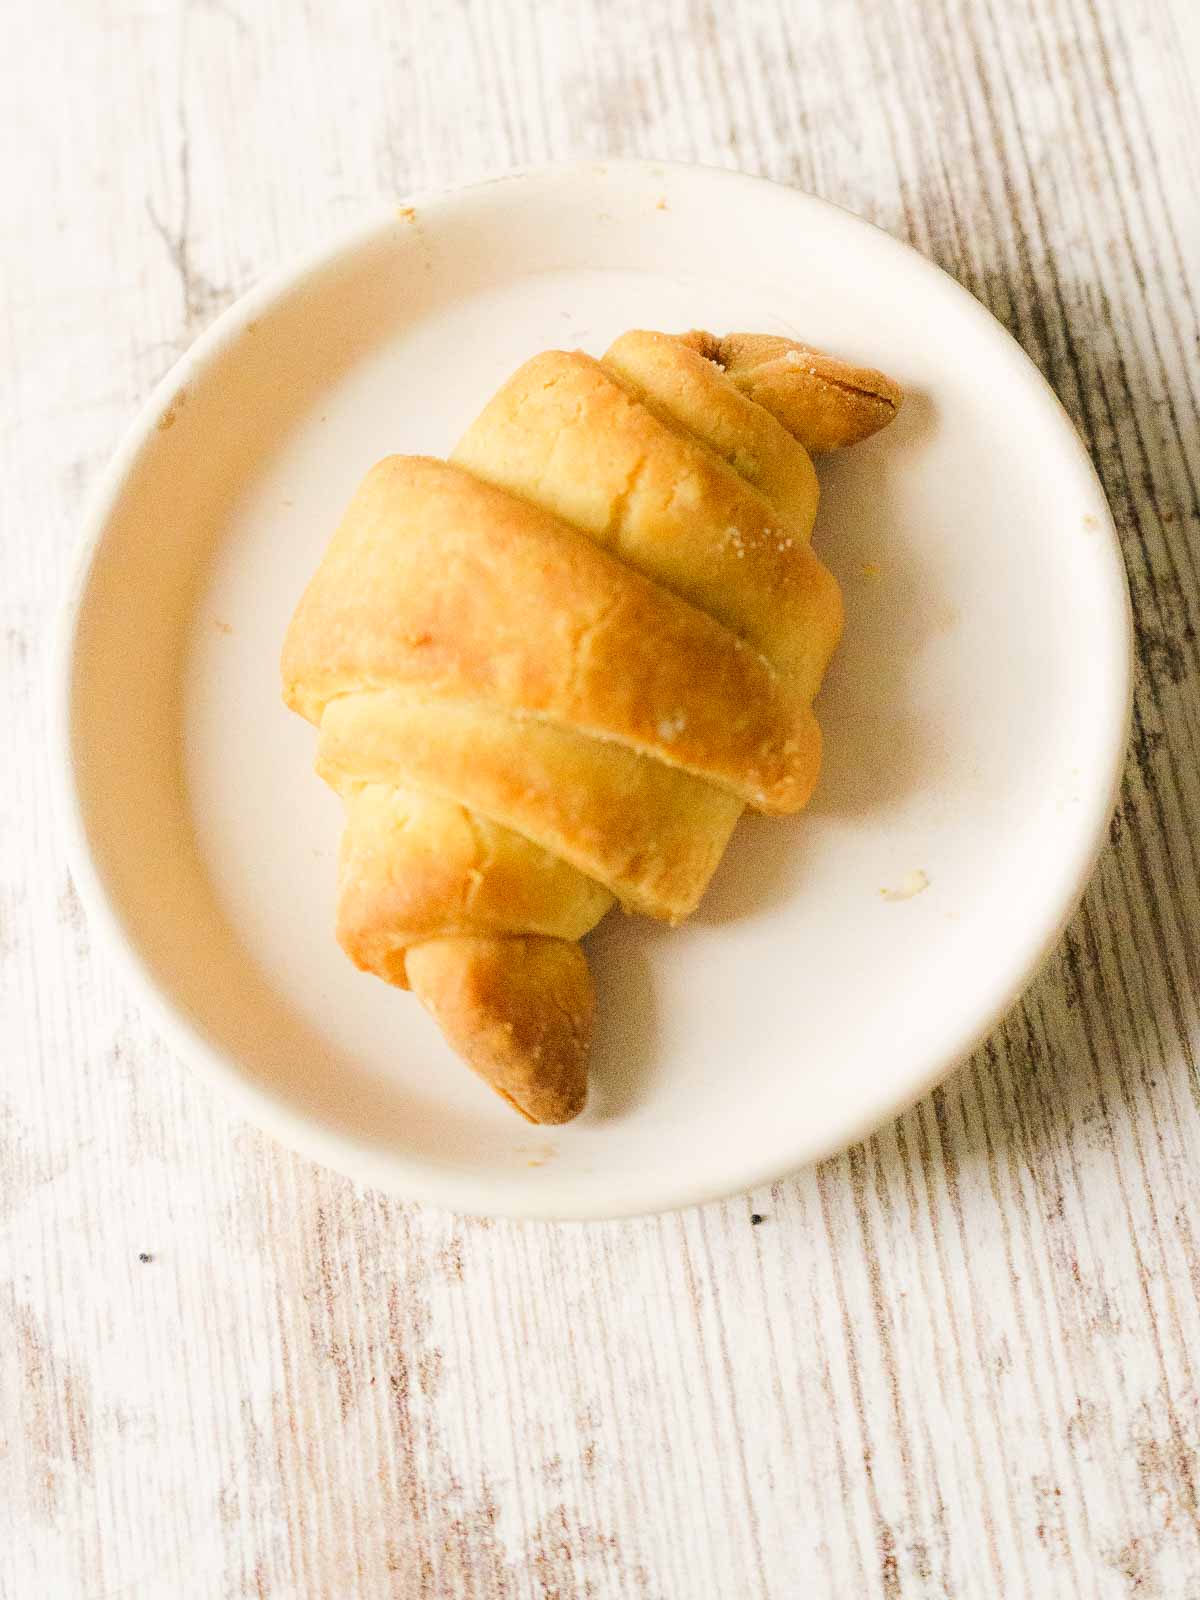 crescent roll on plate